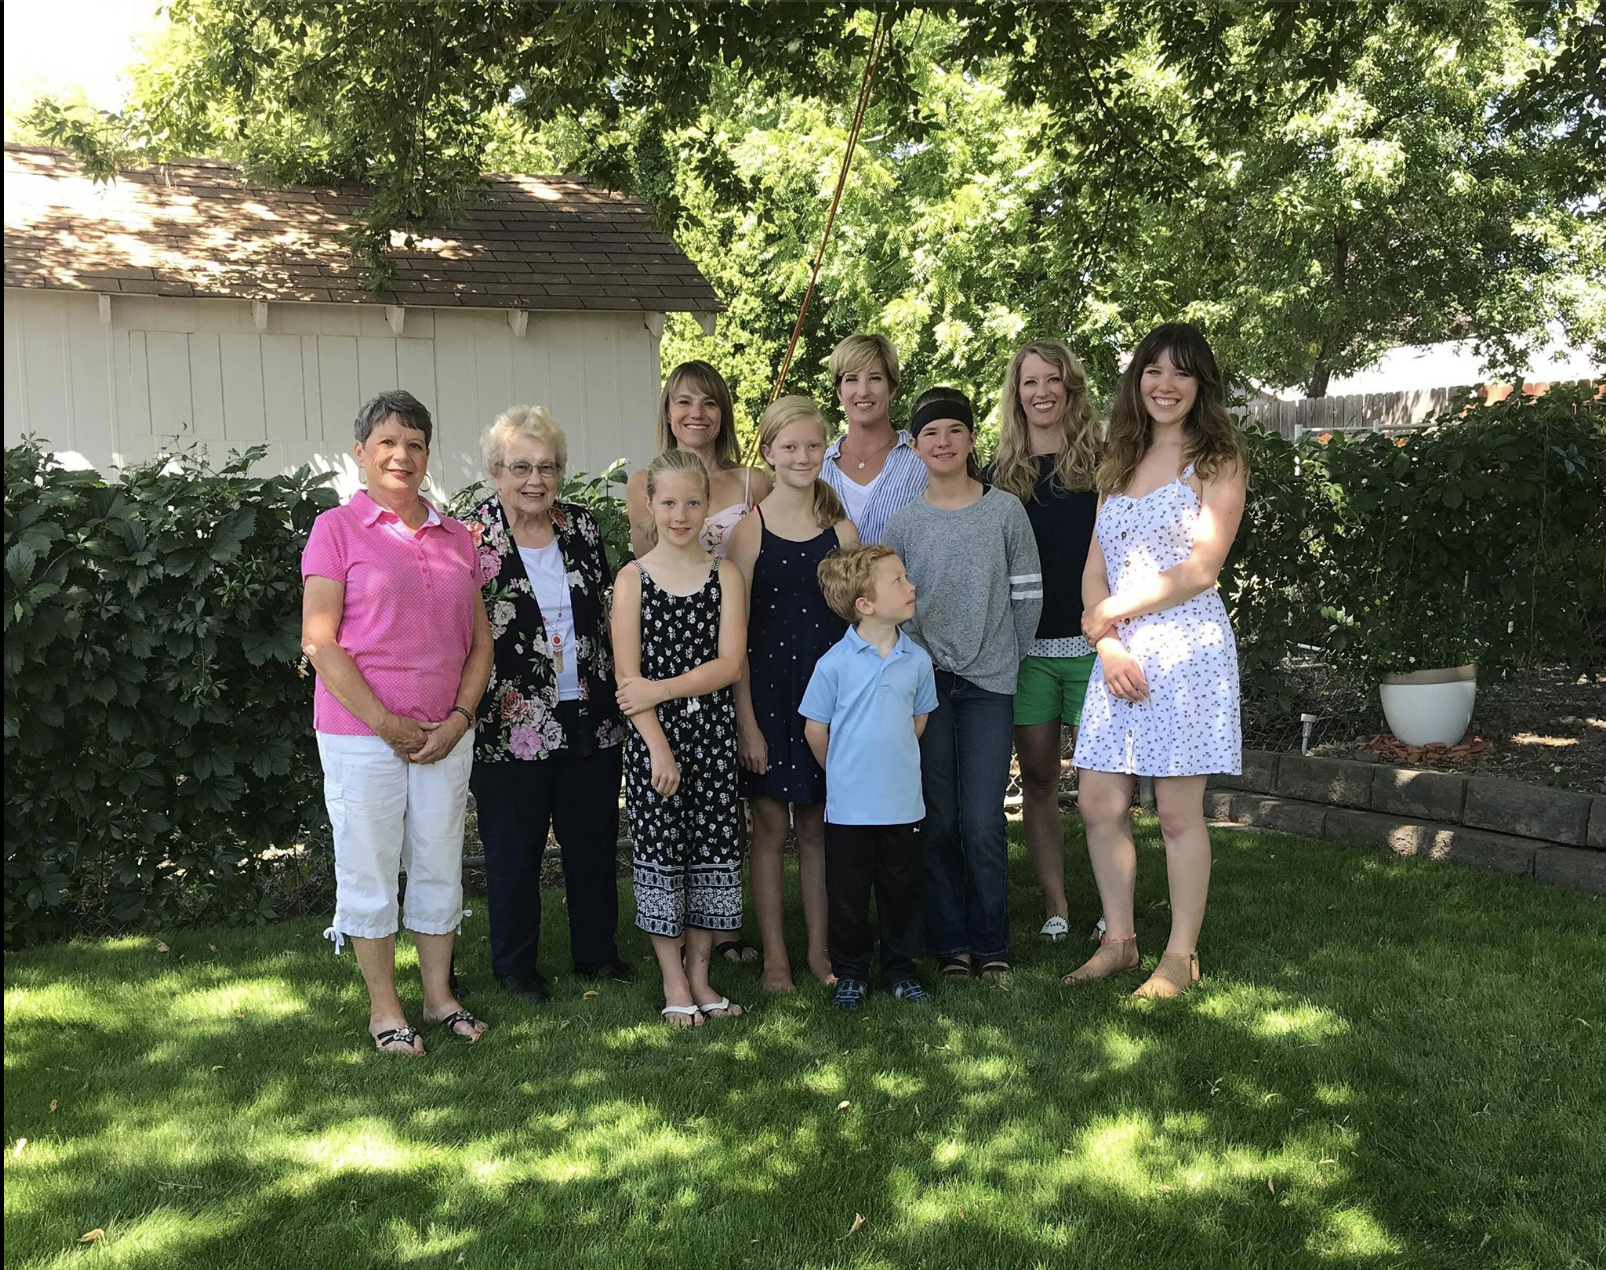 There are 4 generations in this photo! Me and my 2 sisters, our Mom, our grandmother, my 3 children and my sister’s 2 children.